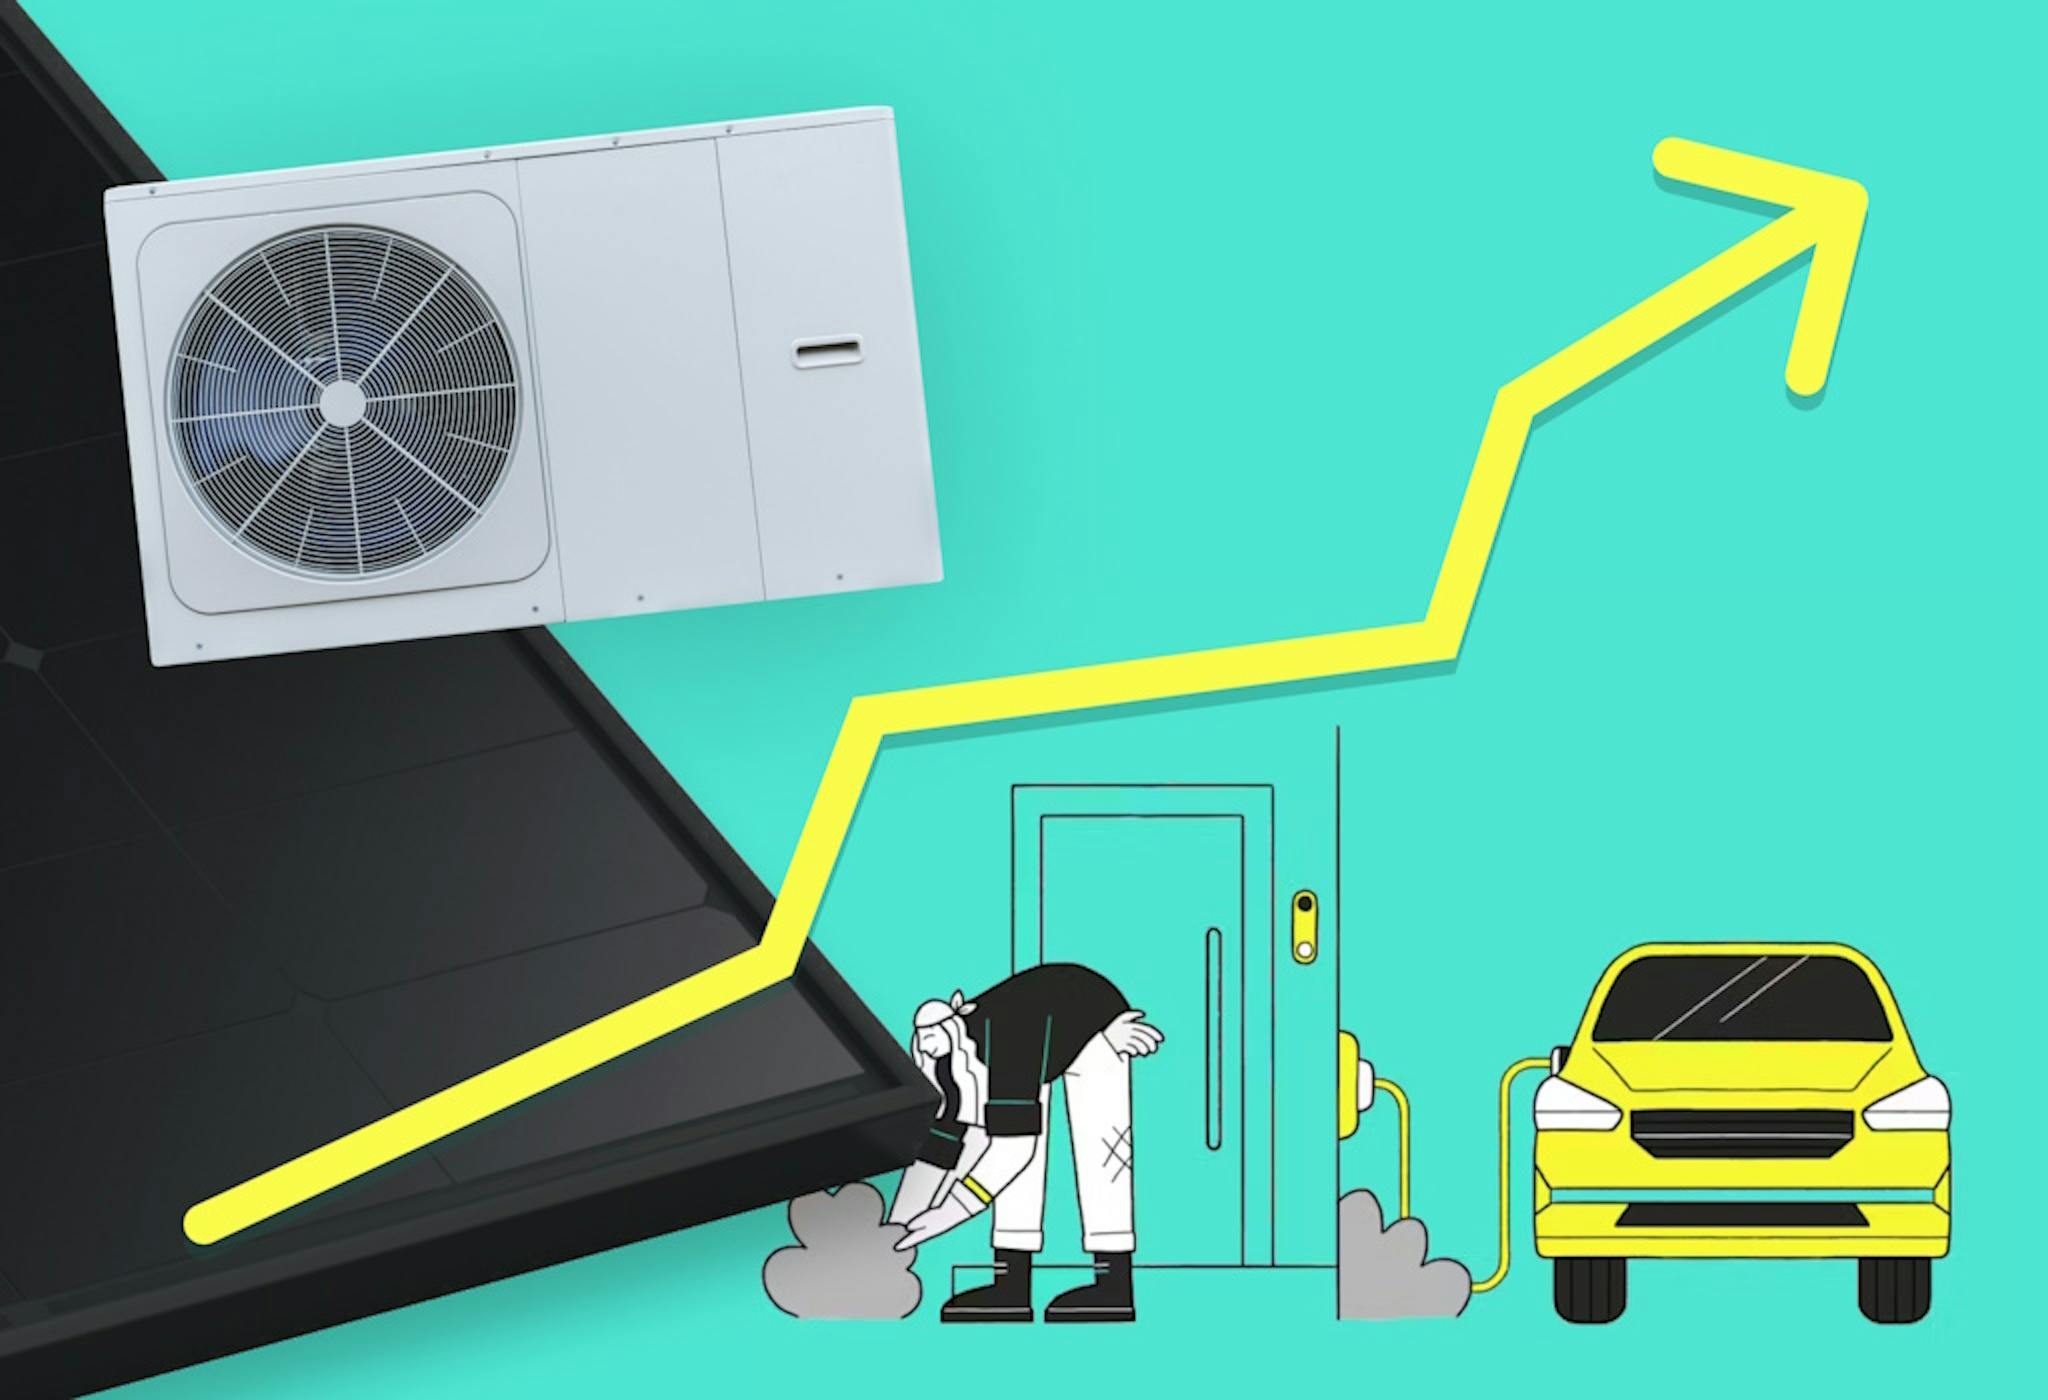 A graphic with a yellow arrow moving from the bottom left to top right pound in the style of a chart, above a person touching a plant next to their yellow electric car being charging by an electric home charger, an image of a black solar panel, and an image of a heat pump. The background is aquamarine